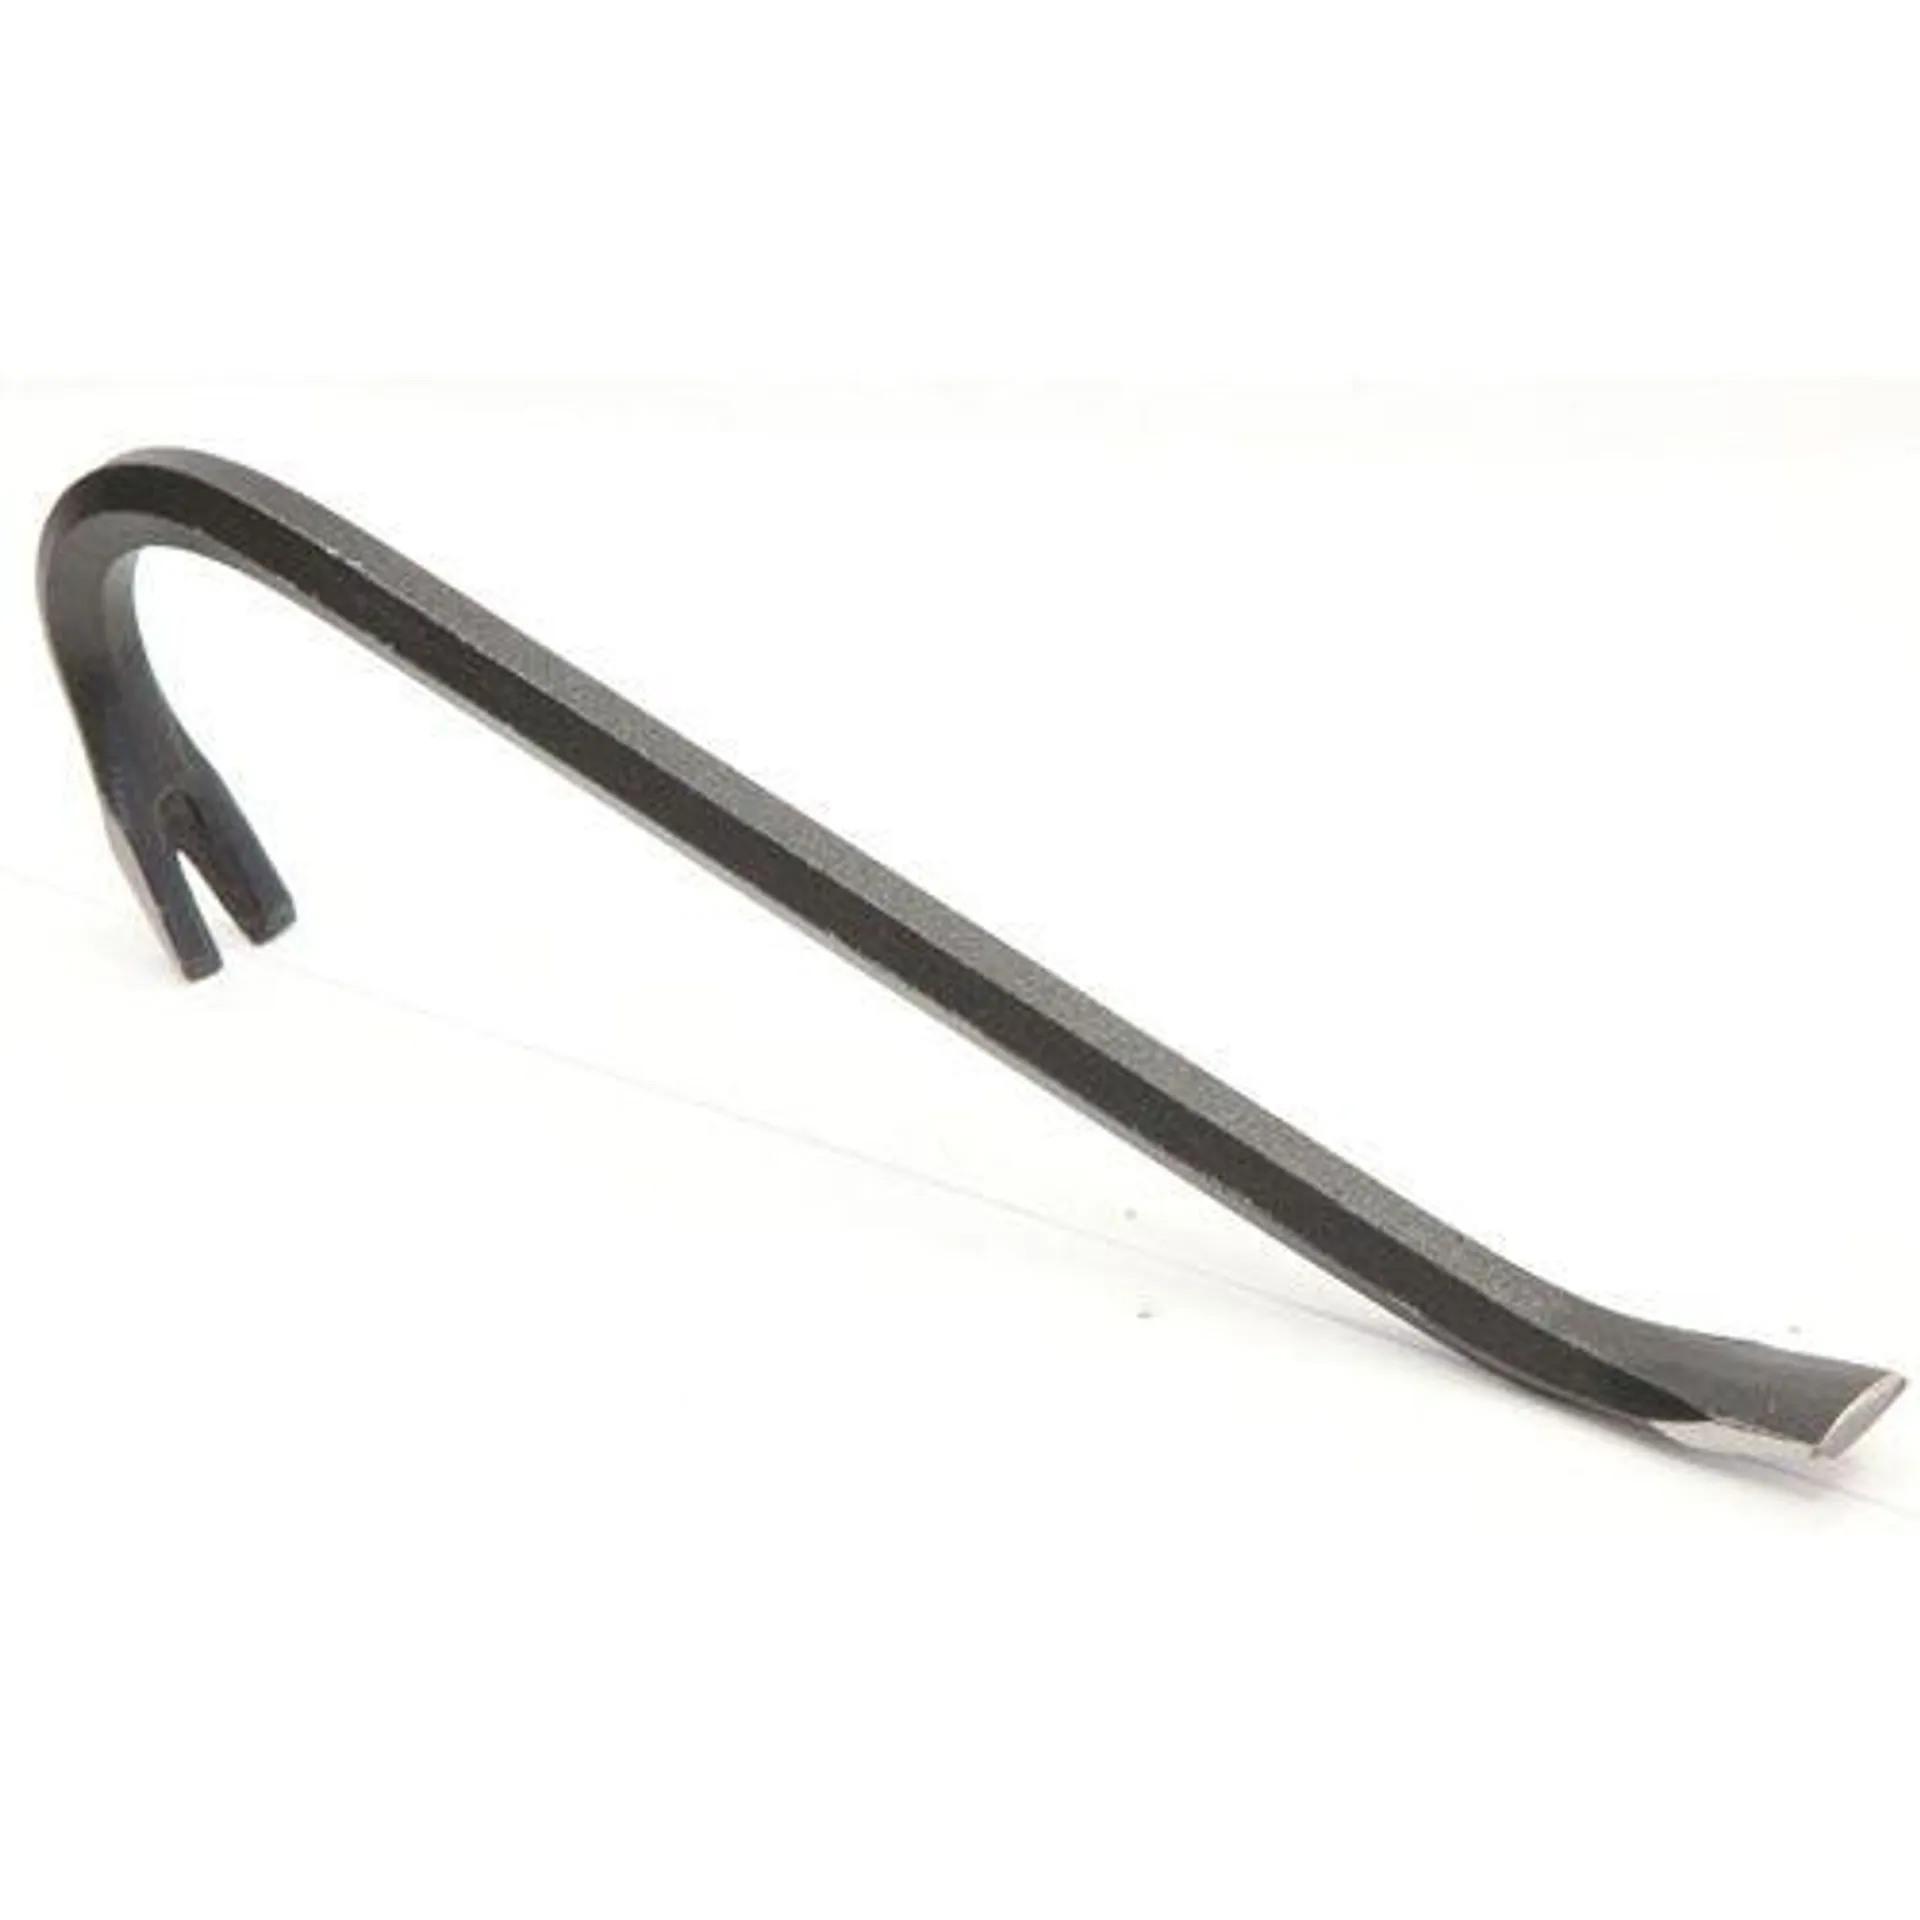 Hex Wrecking Bar 3/4 In. x 24 In.